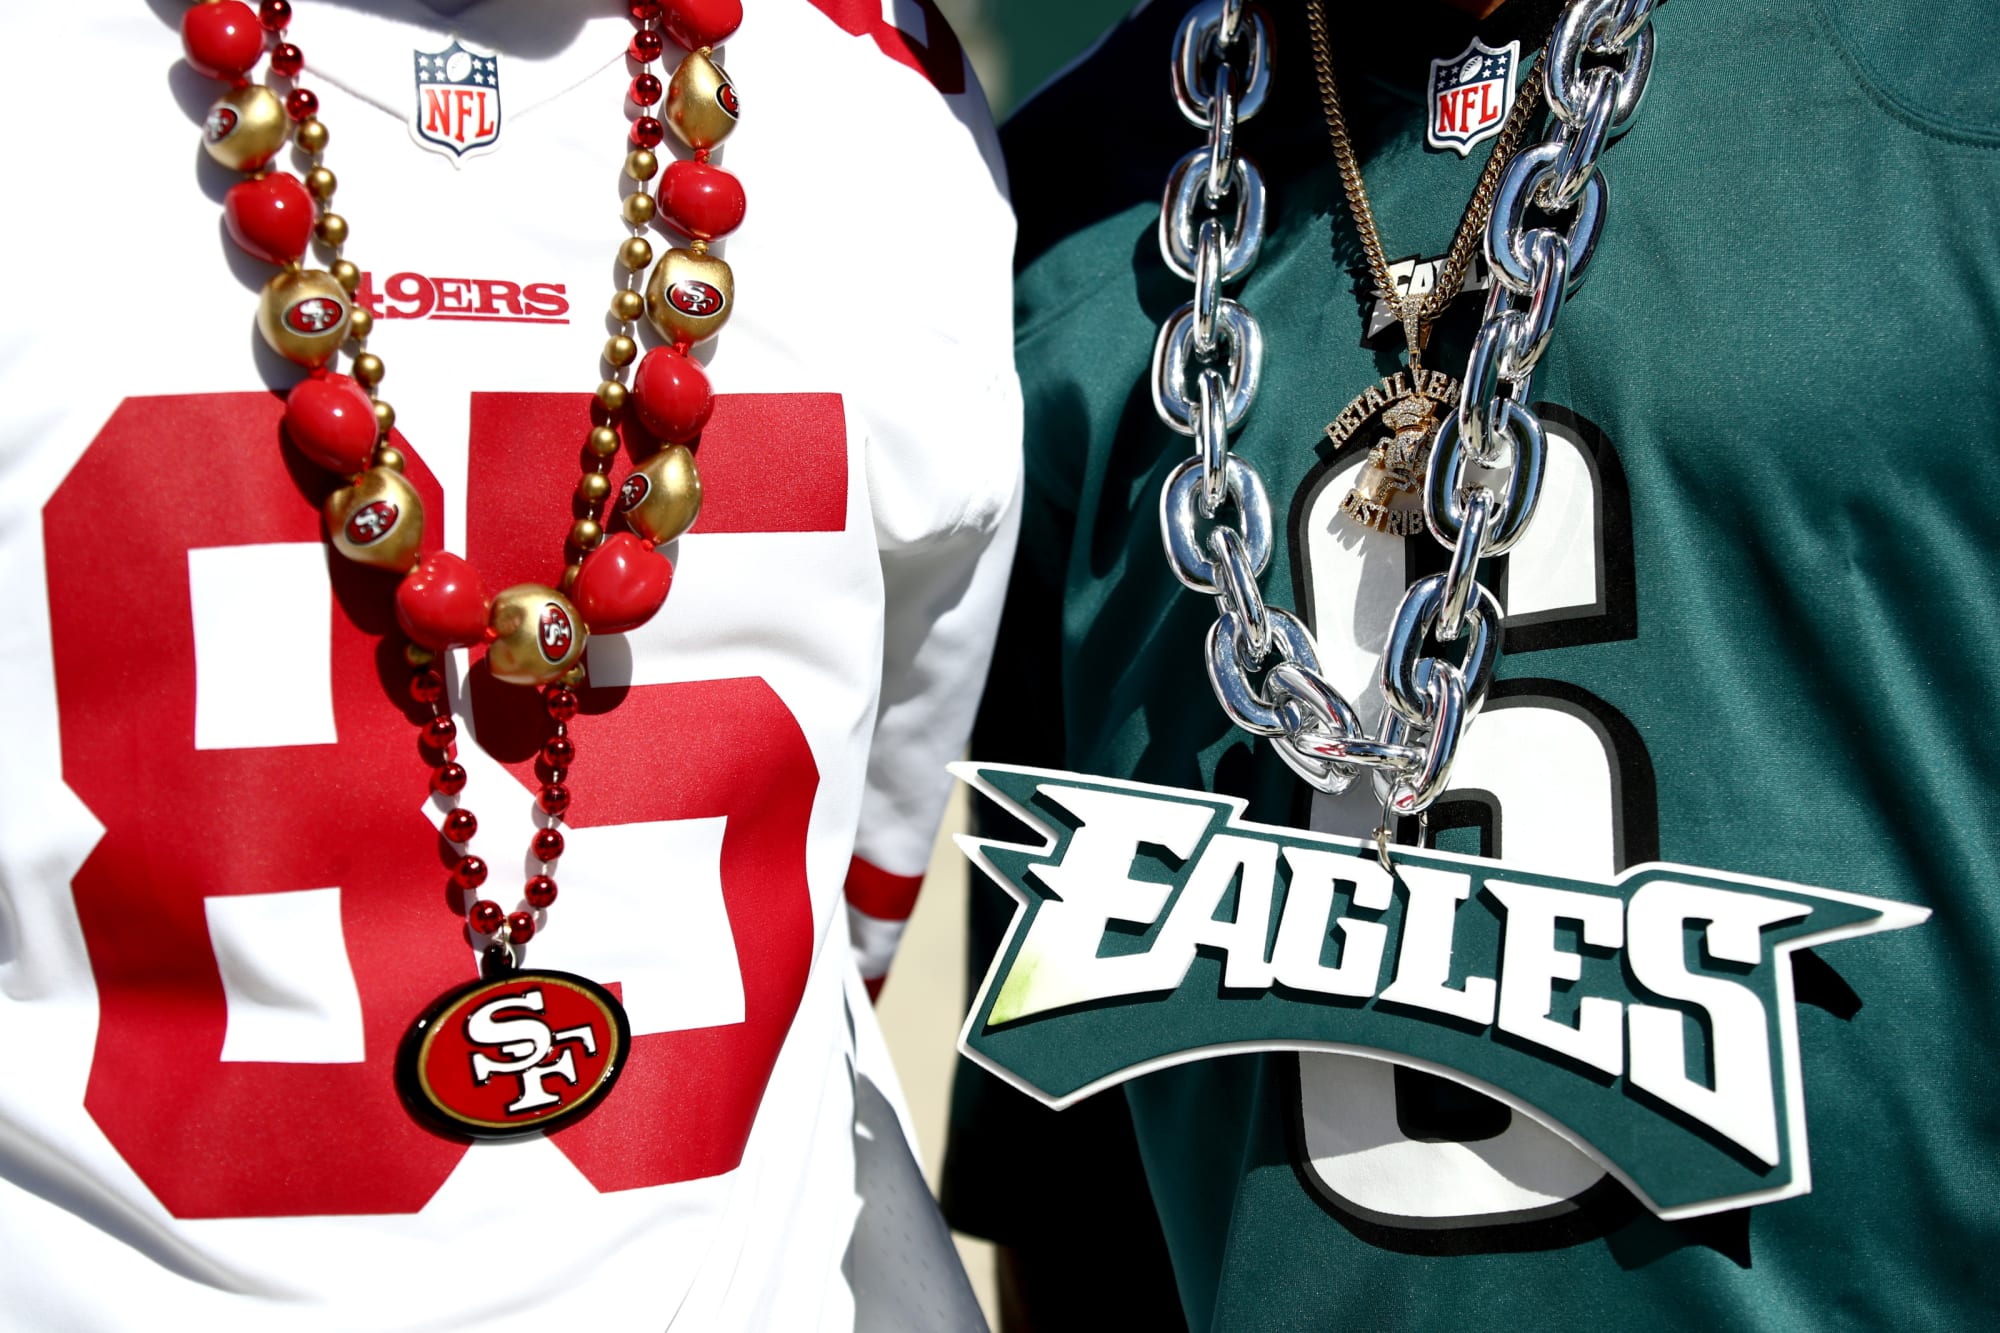 49ers-Eagles NFC Championship ticket prices break NFL records